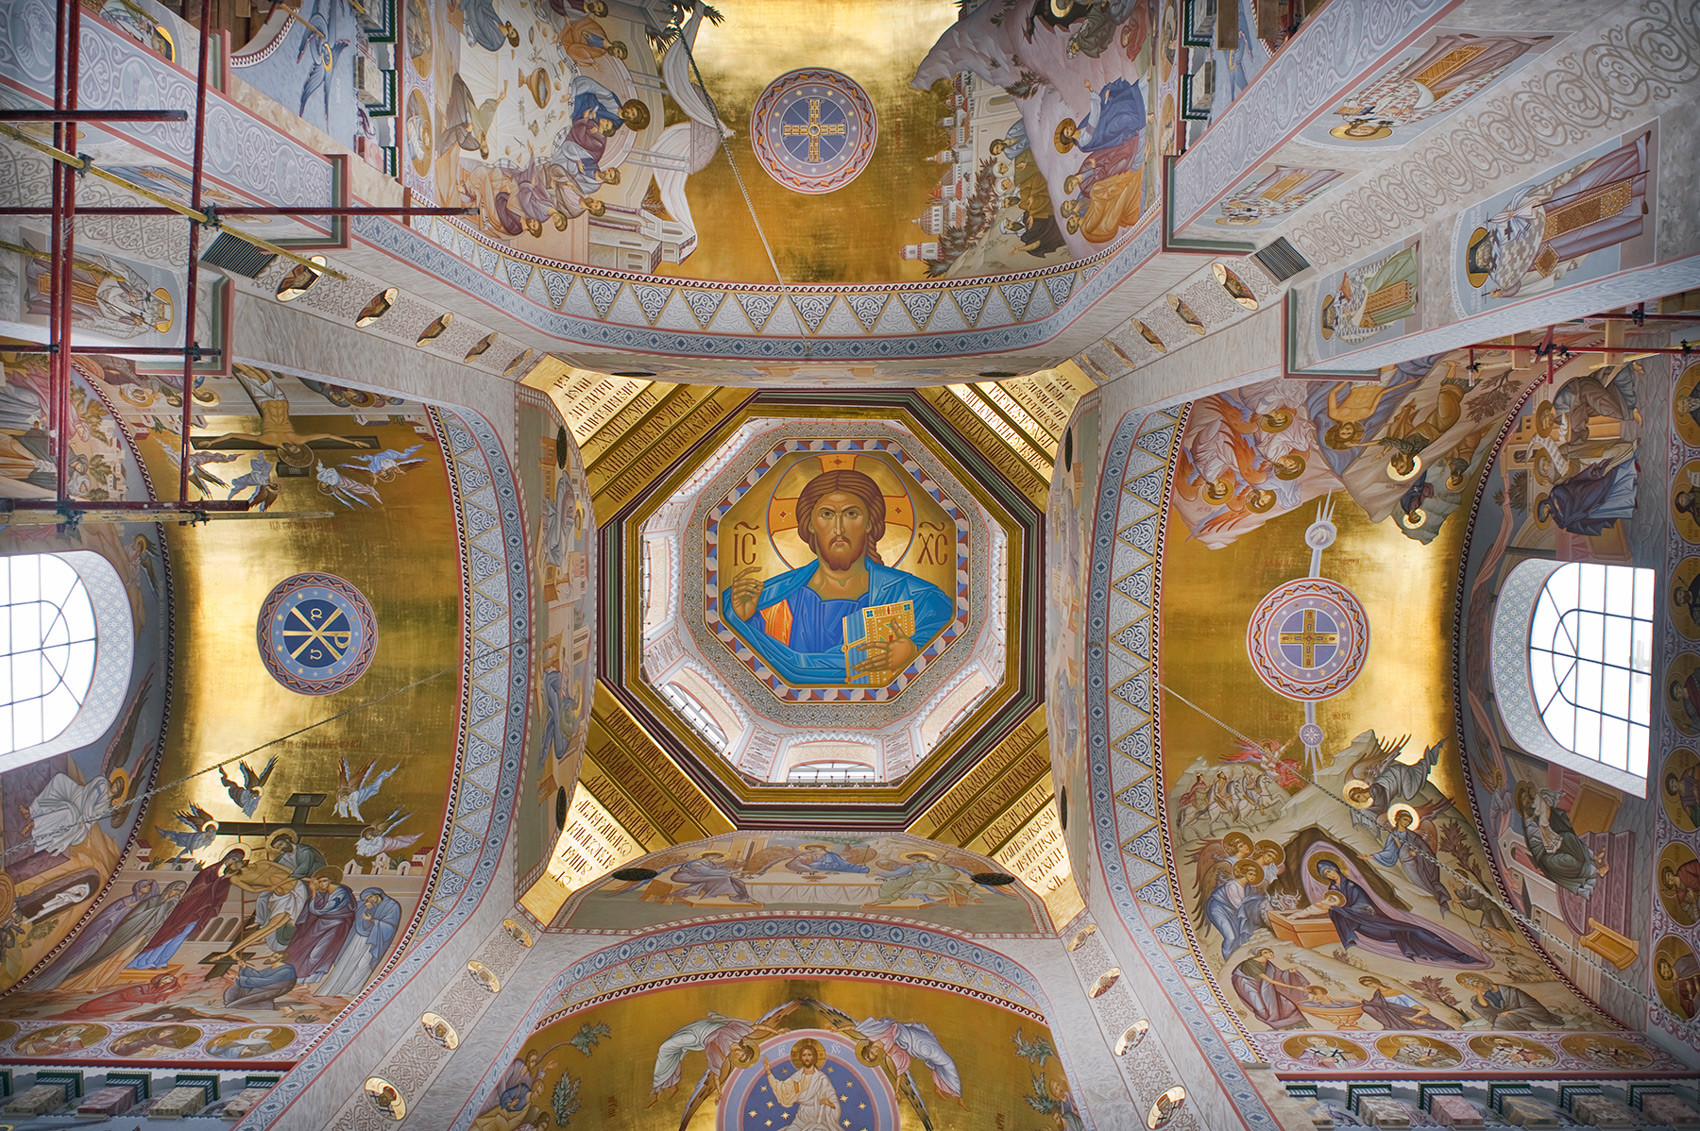 Church of All Saints Resplendent in the Russian Land. Interior with image of Christ Pantokrator in main dome. April 3, 2017.